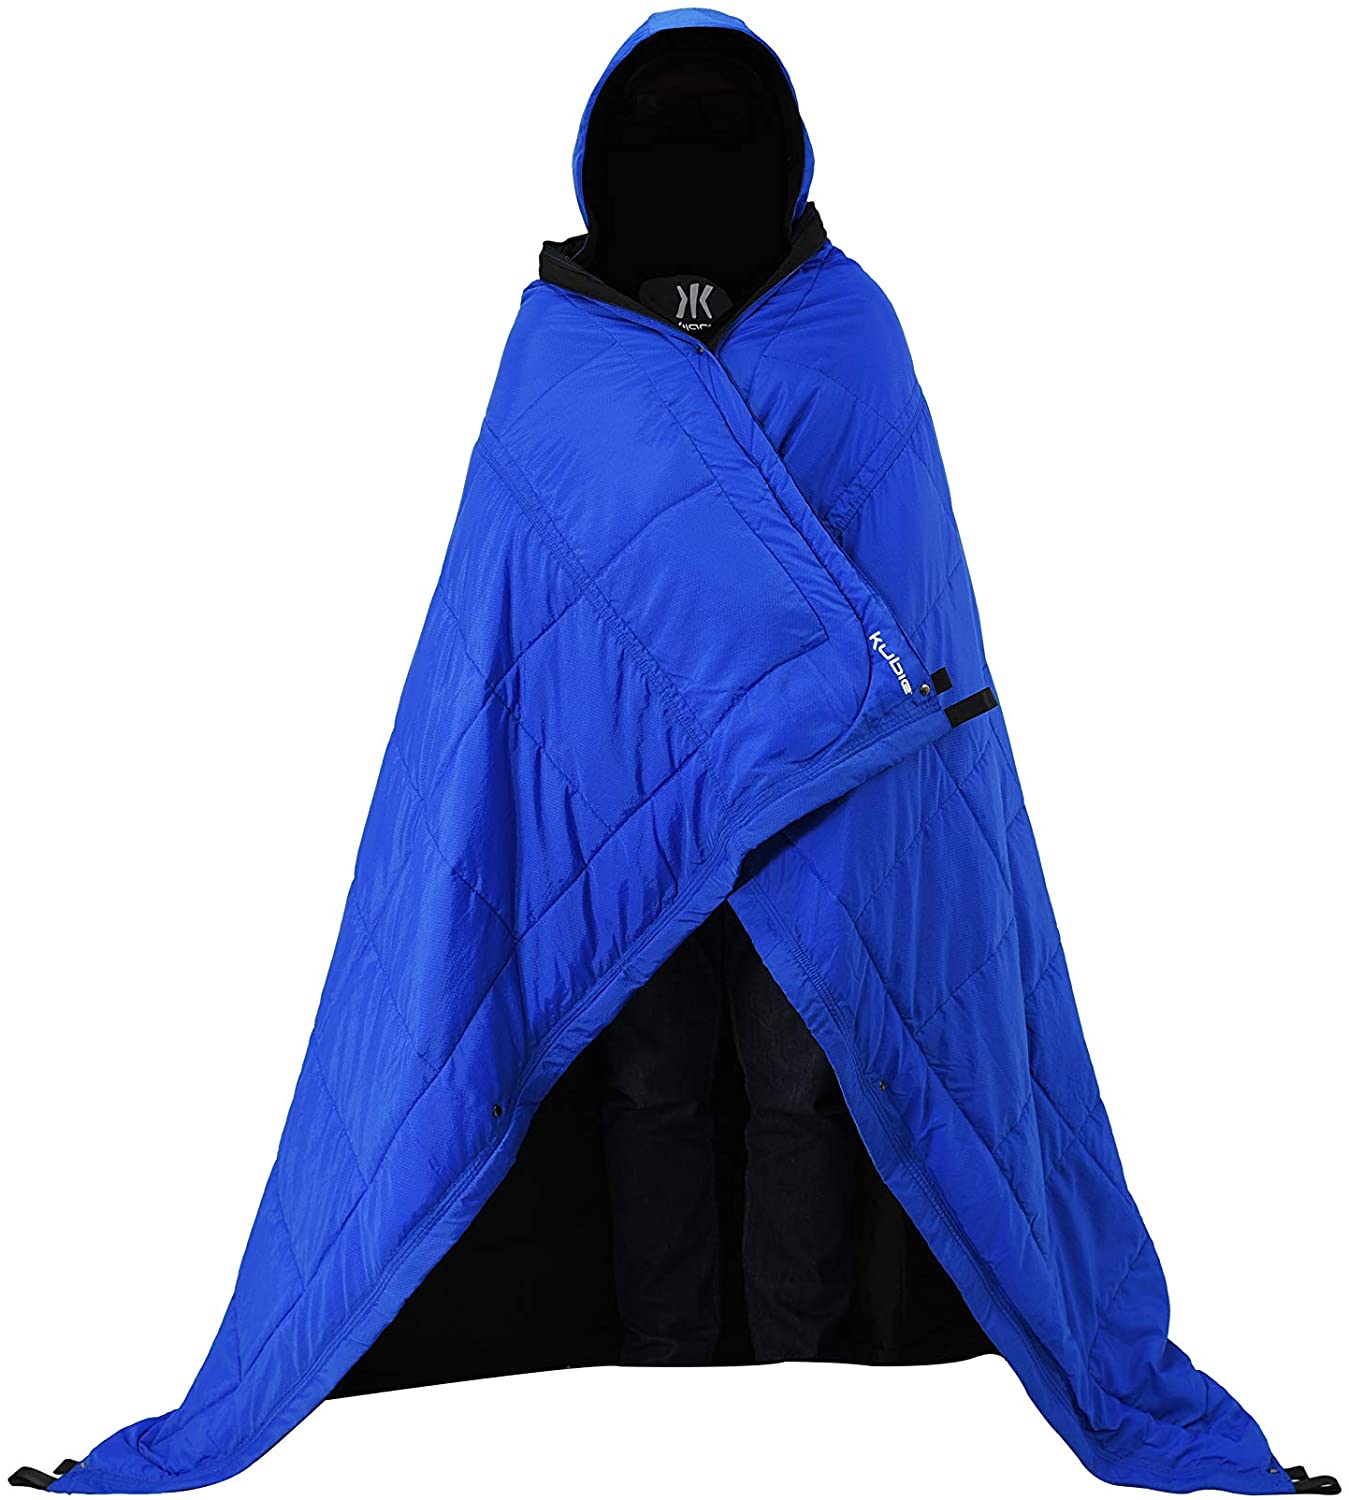 Kijaro Kubie Versatile, Multi Use Outdoor Product Configuring into a Hammock, Sleeping Bag, Poncho, Blanket, Shade Canopy for Camping, Travel, and Sideline Sport Games